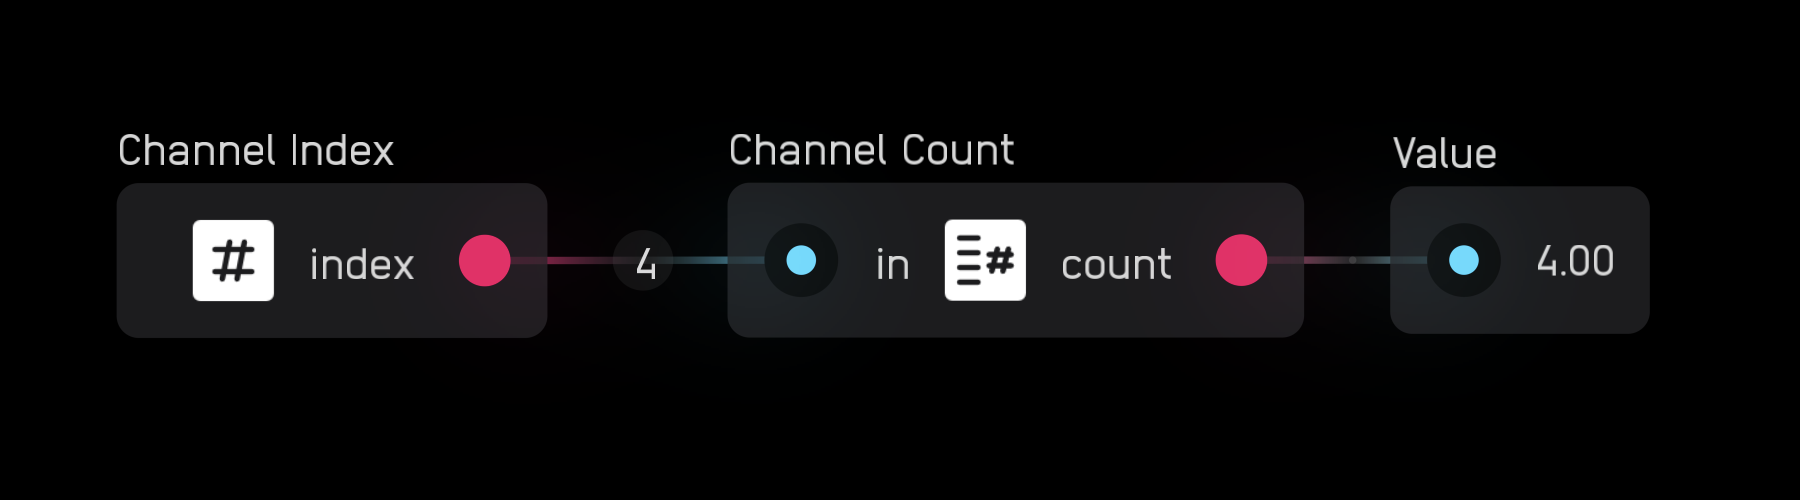 channel count values